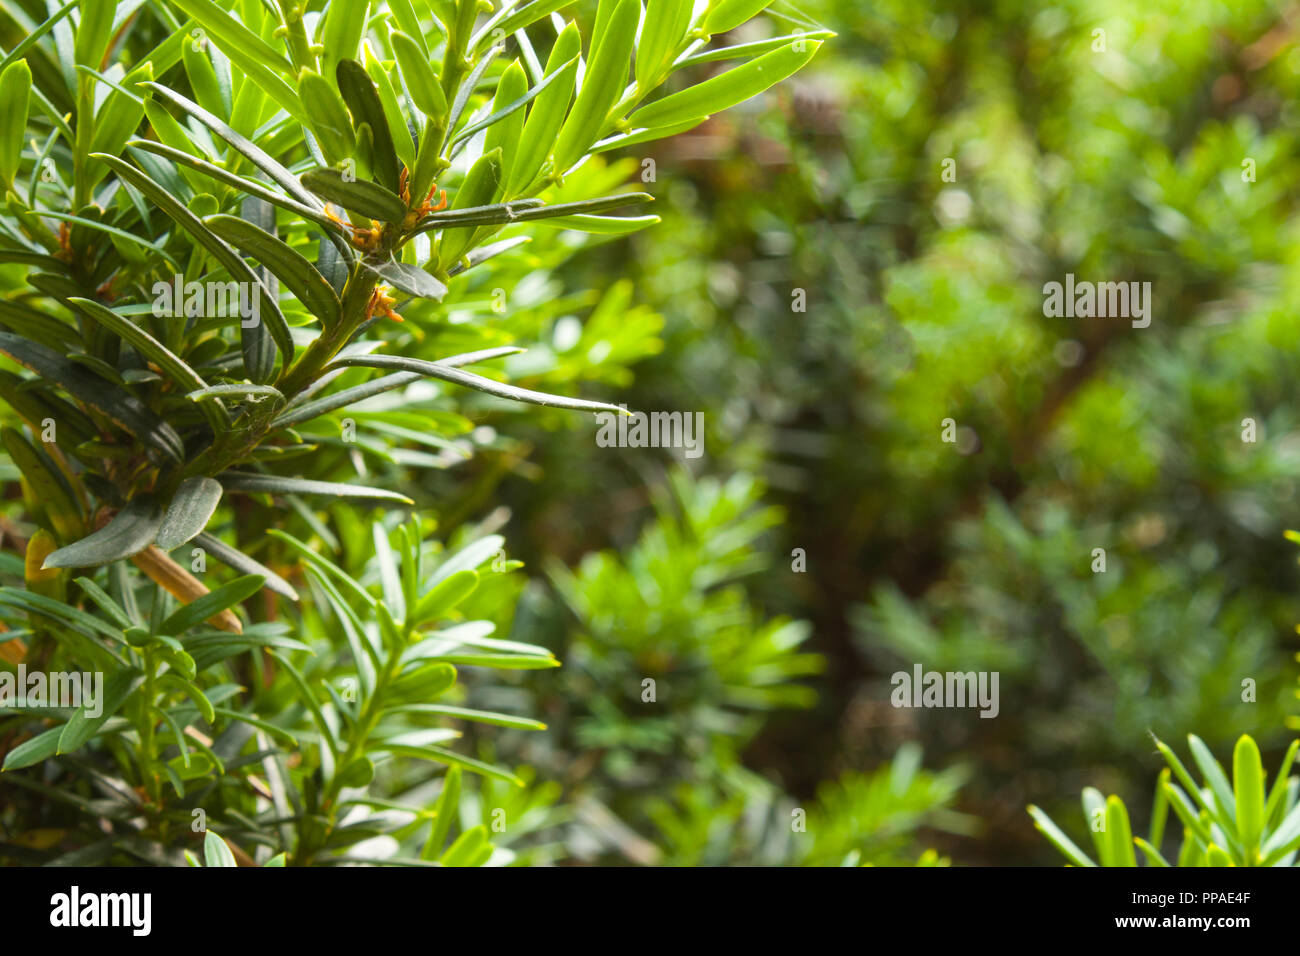 The green bush is close up. Blurry background Stock Photo